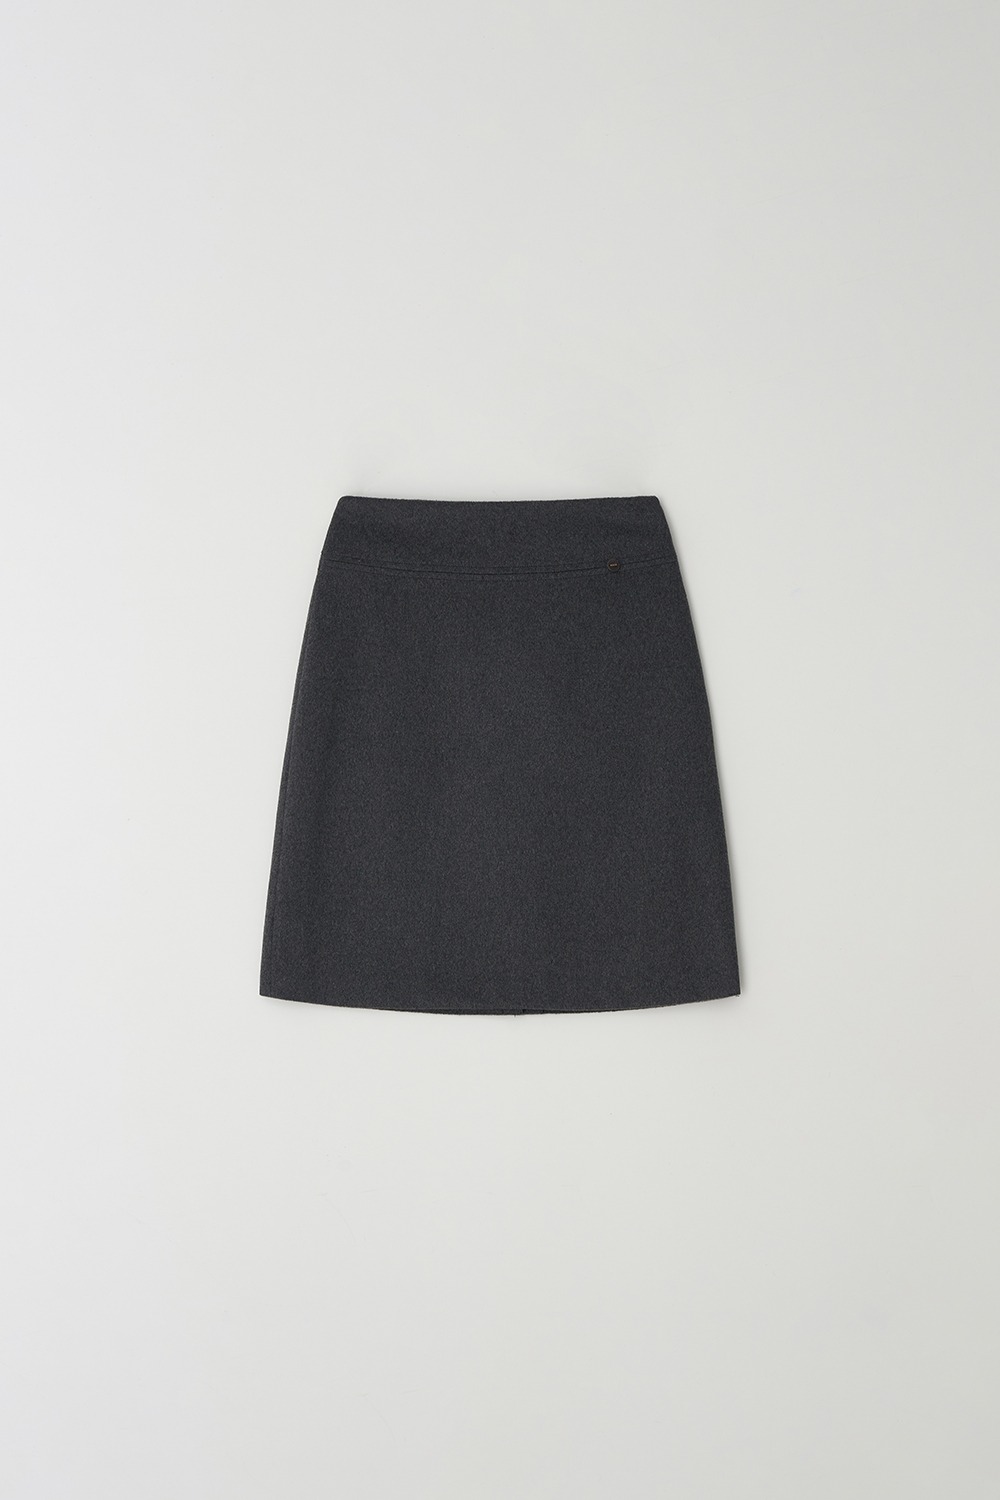 Cashmere mid-skirt (Charcoal)